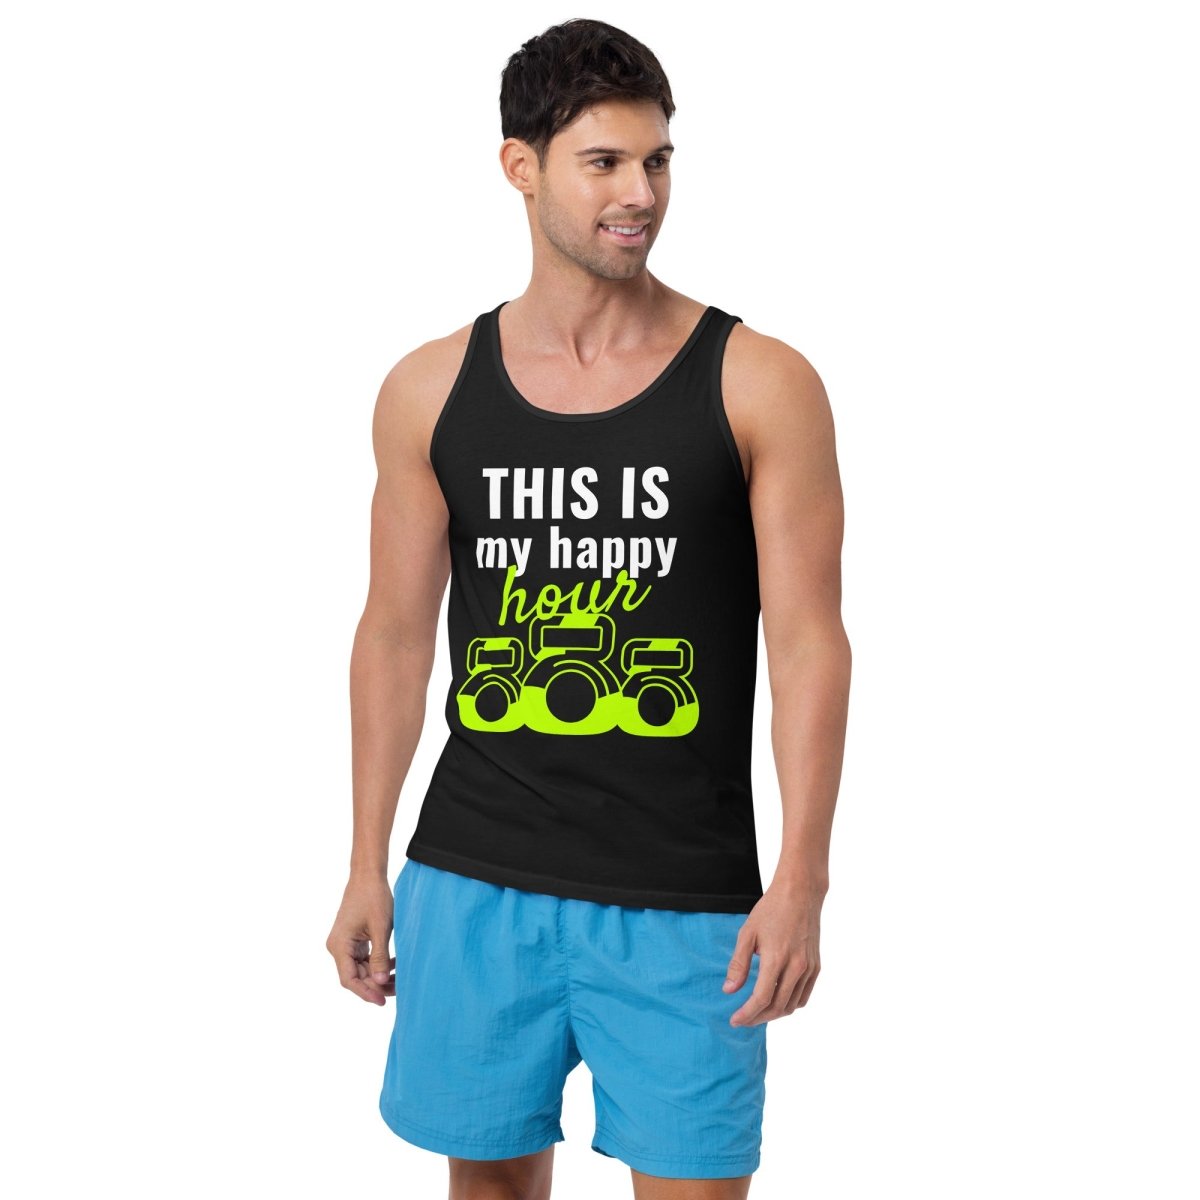 This Is My Happy Hour Men's Tank - Sobervation